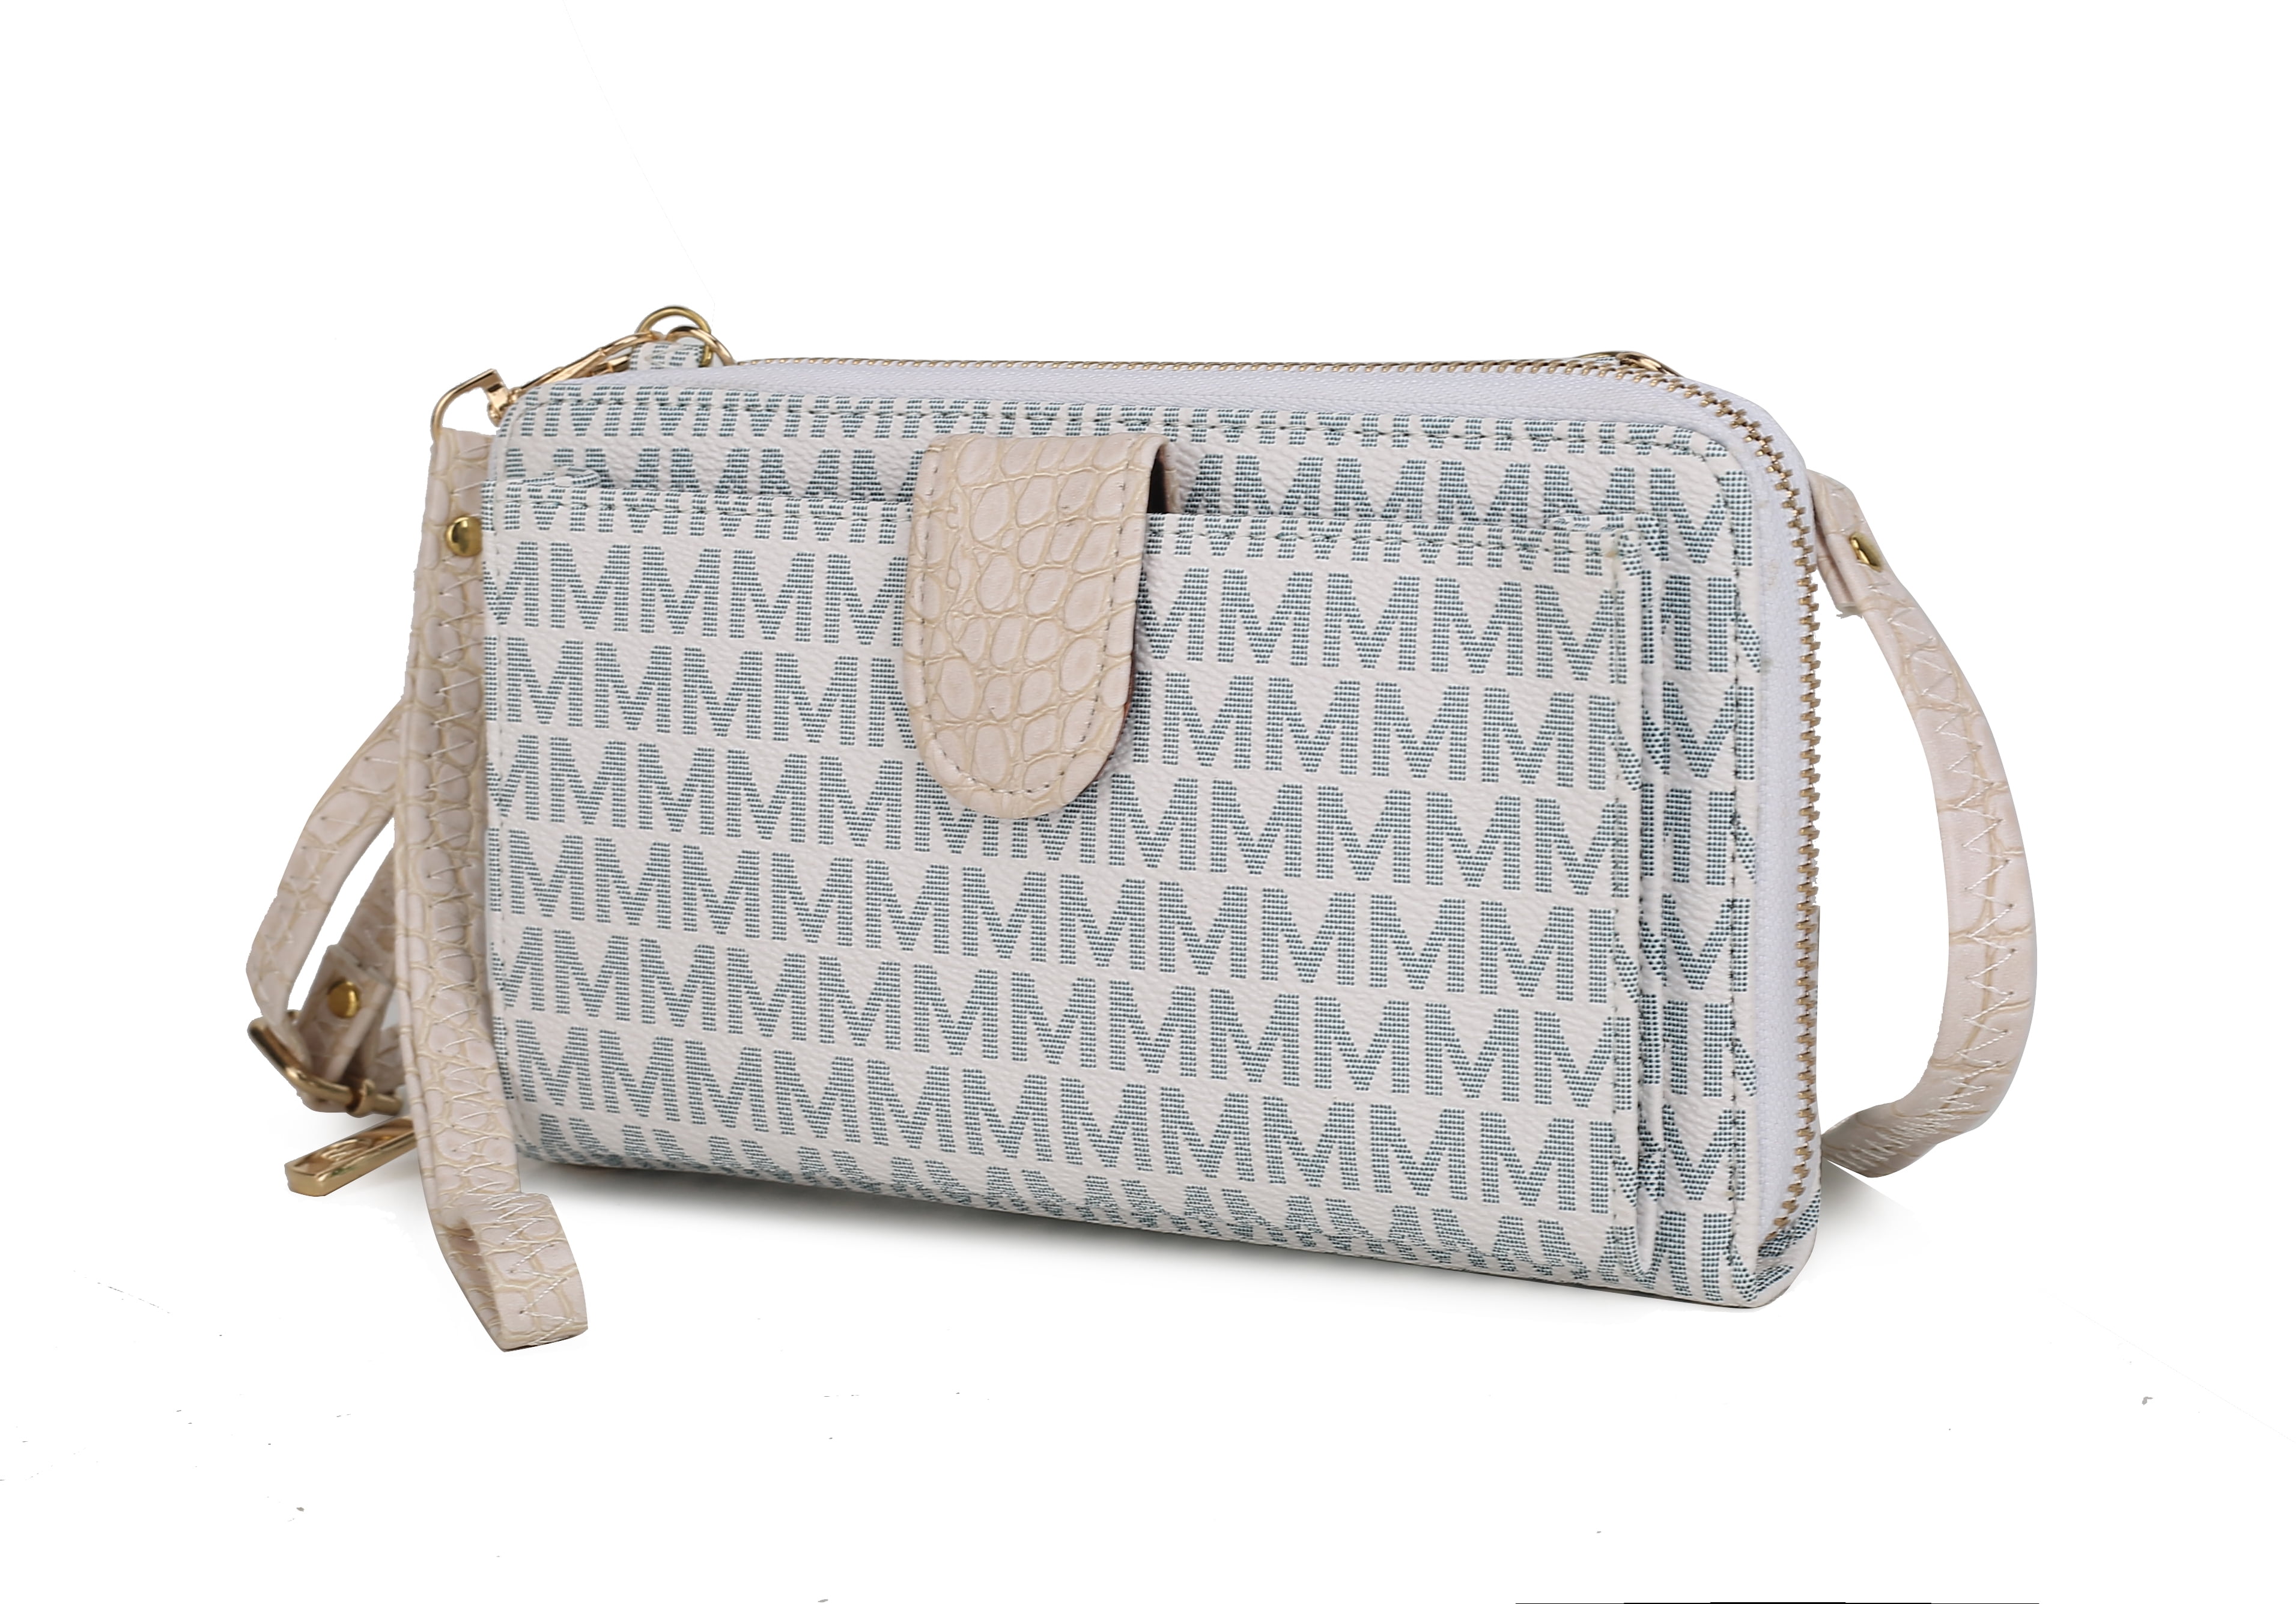 Dropship MKF Collection Tarren Signature Crossbody Handbag Wristlet By Mia  K. - Tan to Sell Online at a Lower Price